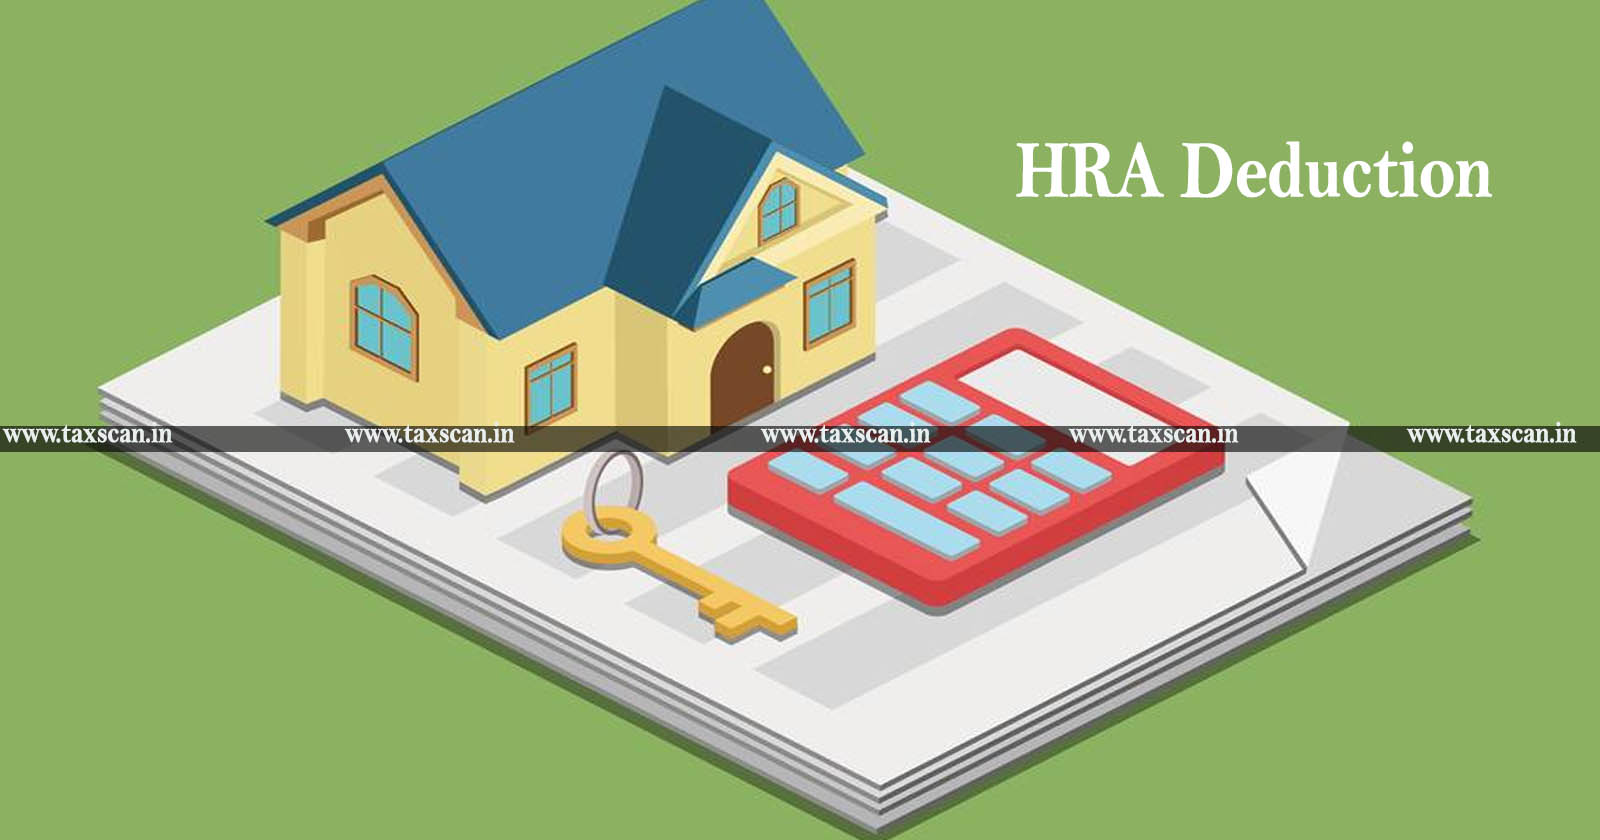 rent-paid-to-wife-eligible-for-hra-deduction-u-s-10-13a-of-income-tax